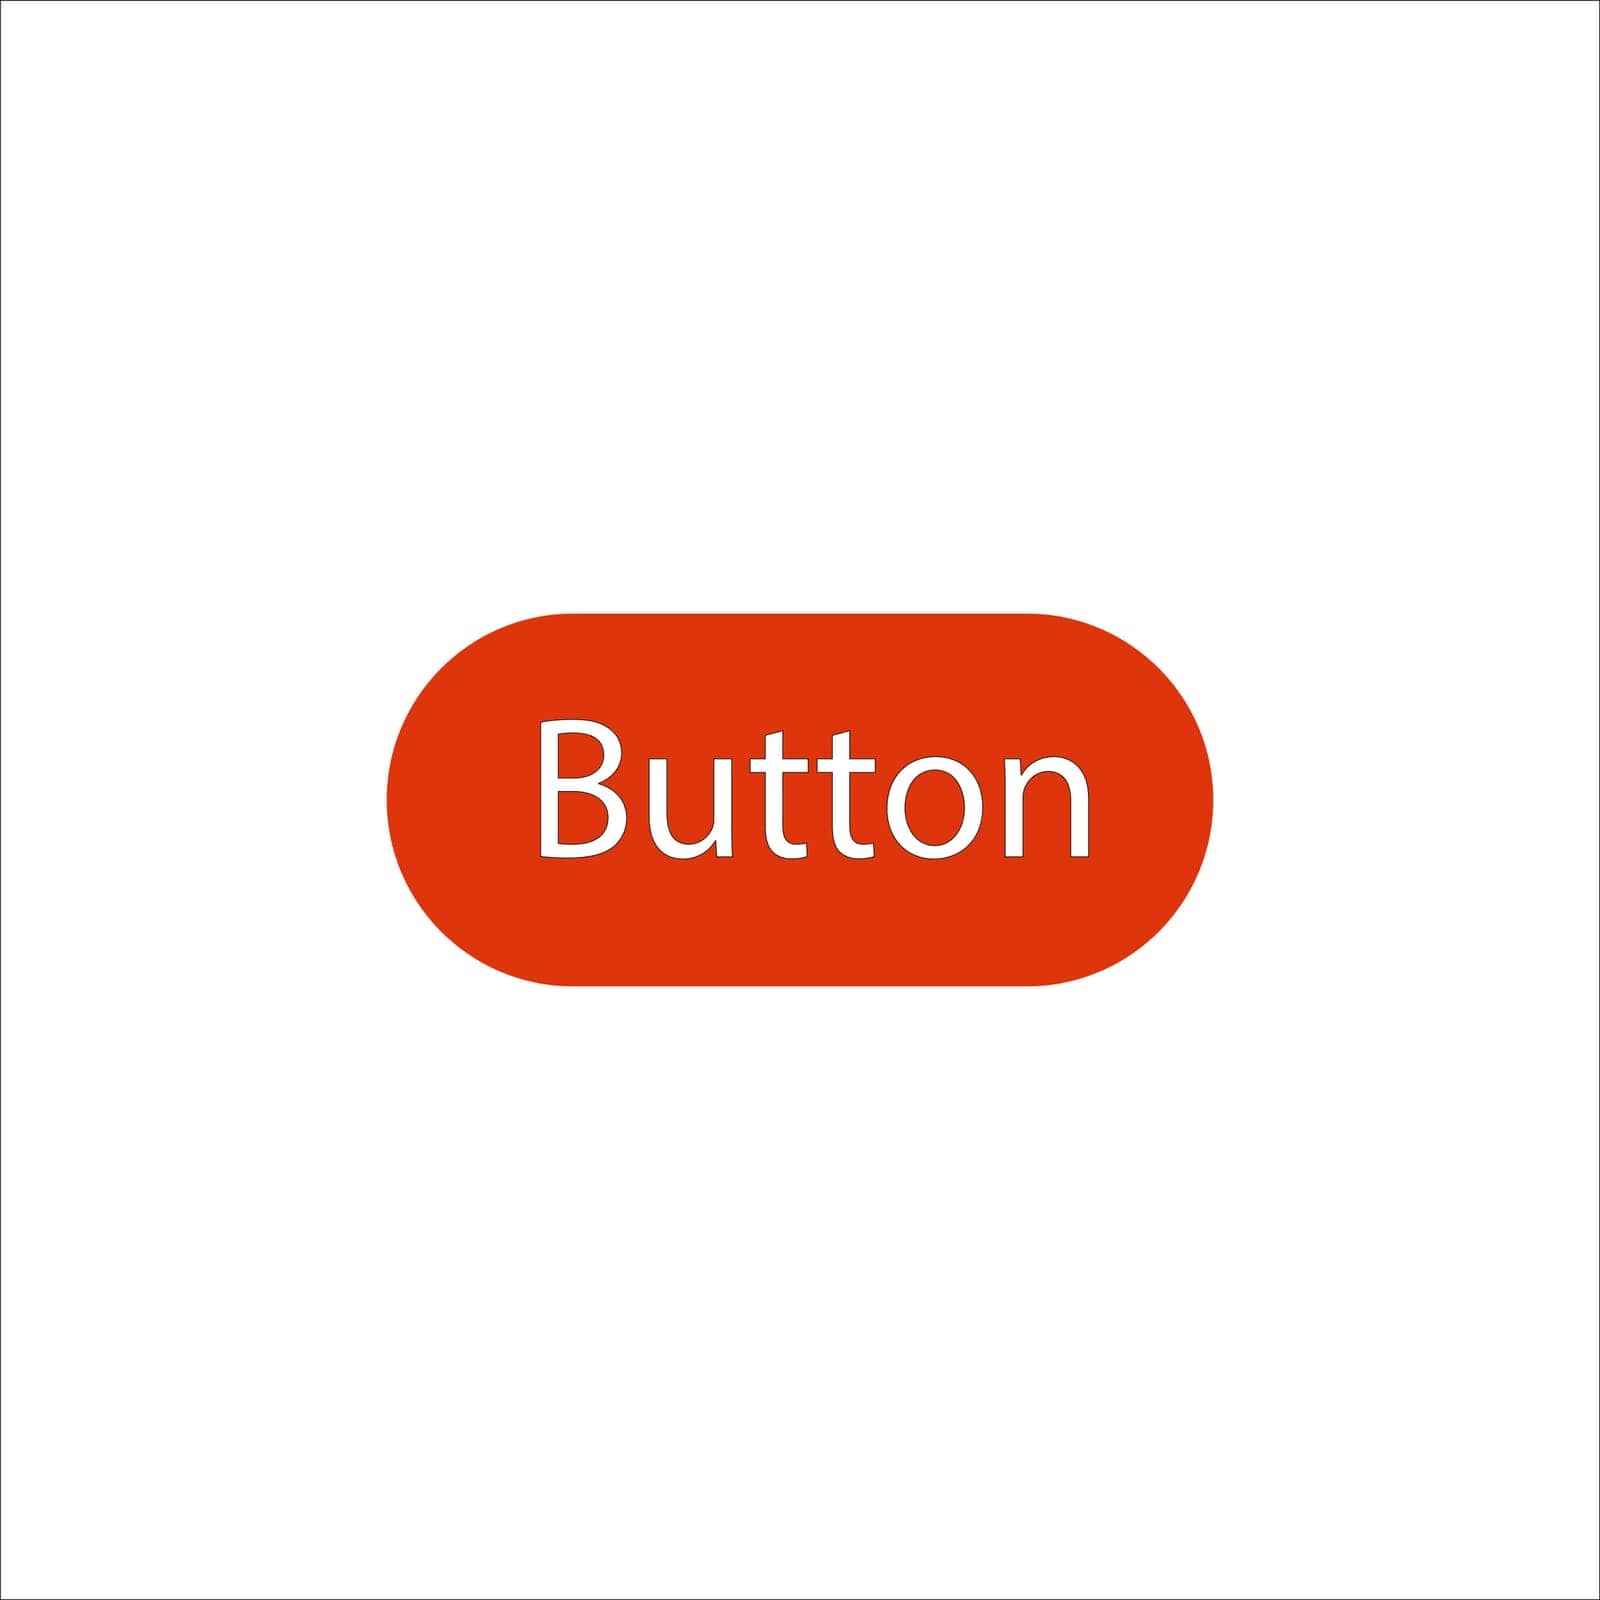 Click web button with. Web button with action UI concept. Stock vector illustration isolated